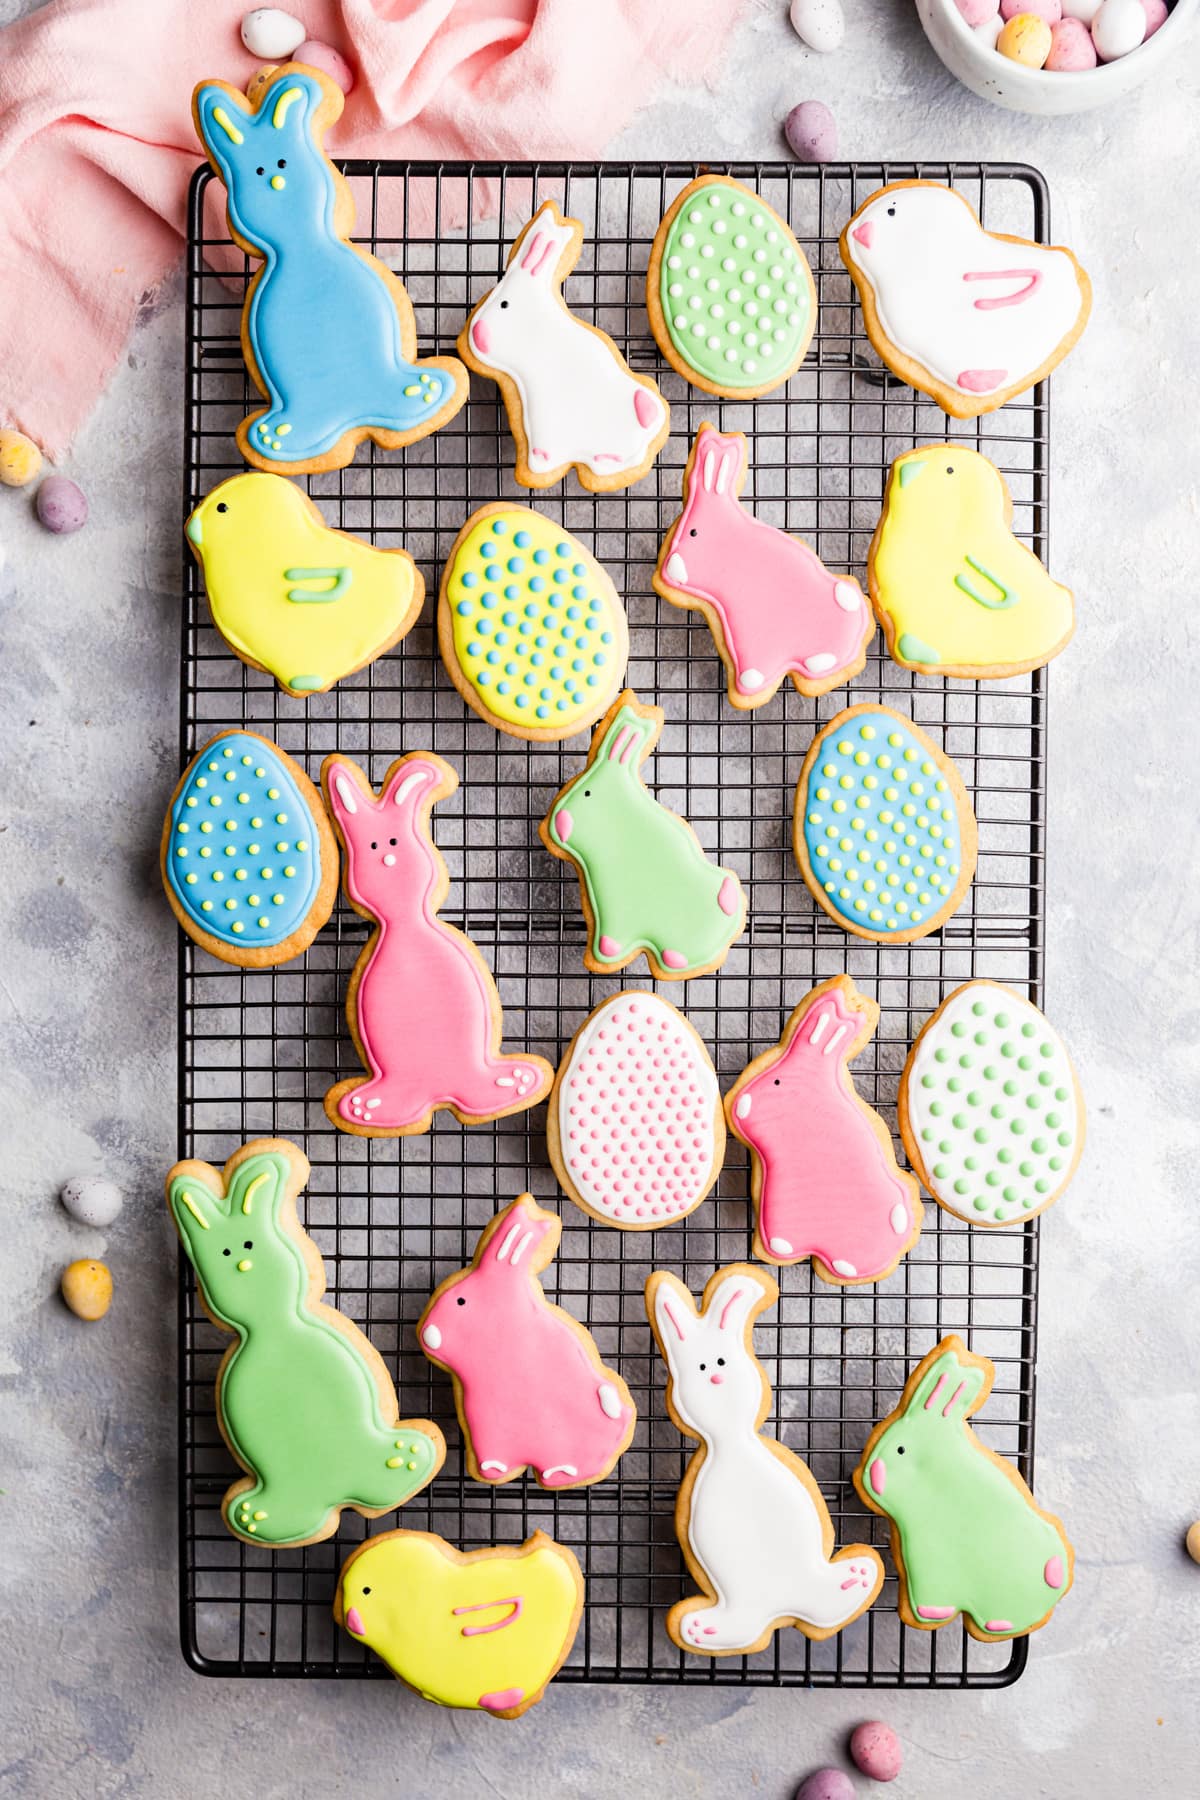 top view of Easter sugar cookies with royal icing on a wire rack